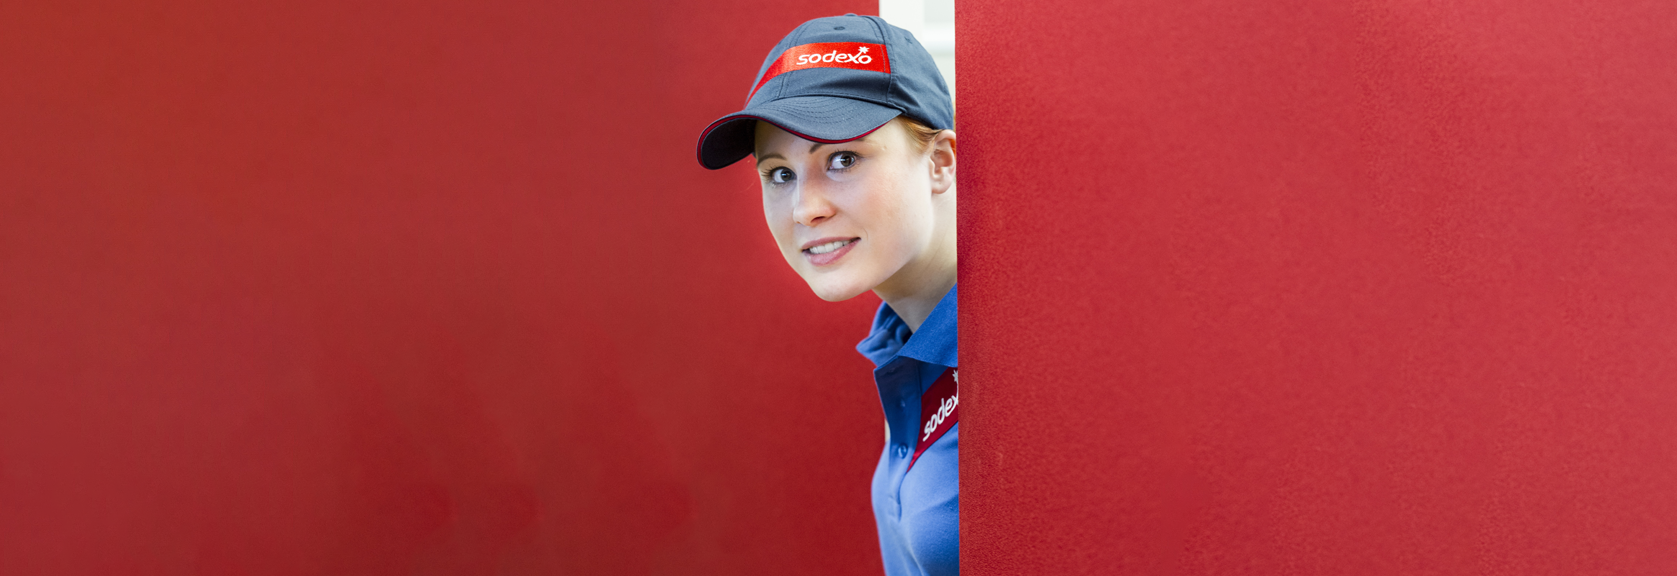 A Sodexo colleague poking her head around a red wall